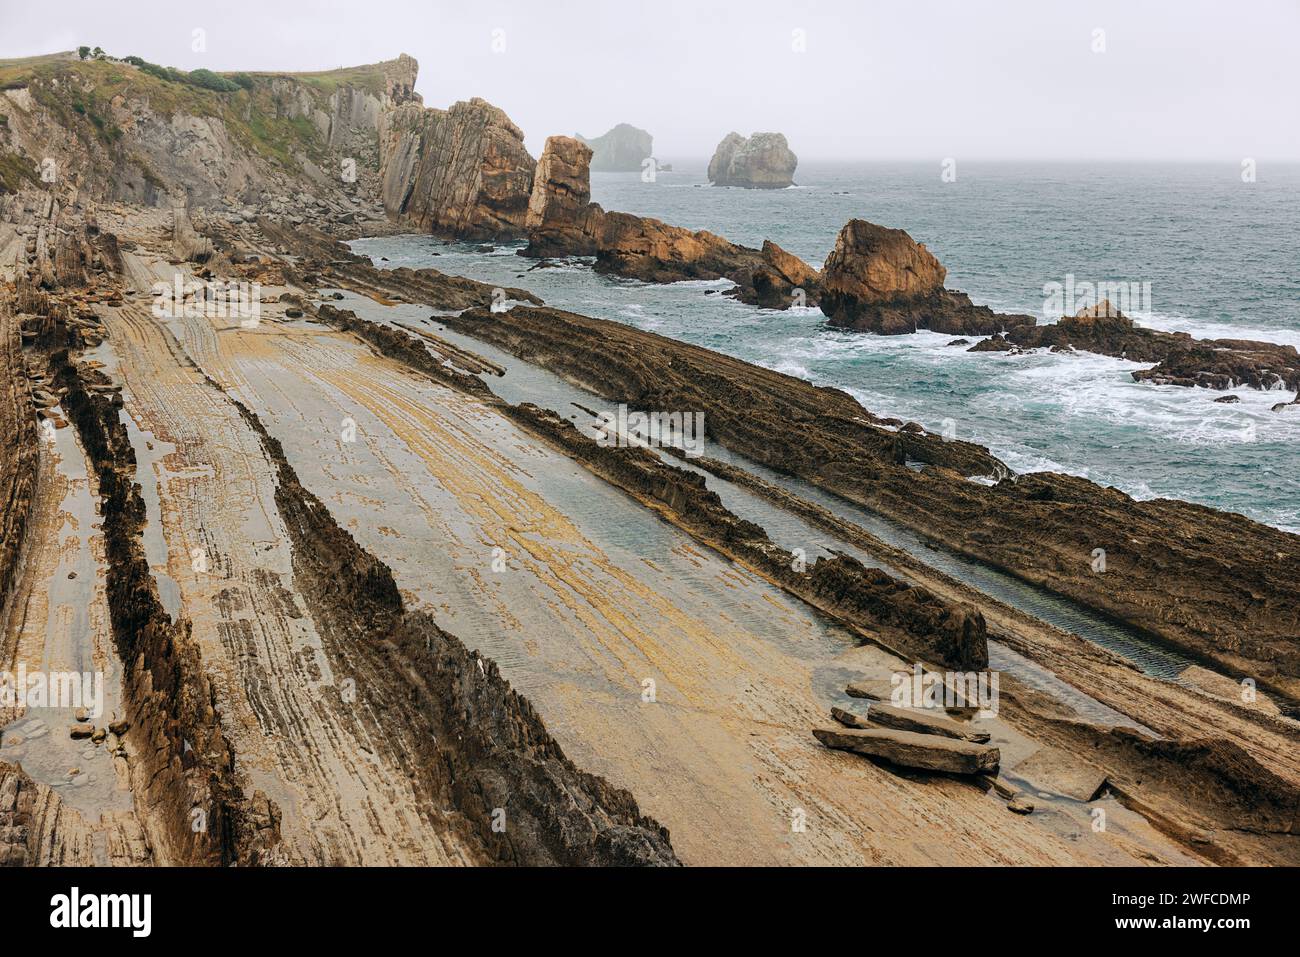 The geological park in Cantabria, near Santander. The unique flysch rock formations. The dramatic coastline Stock Photo